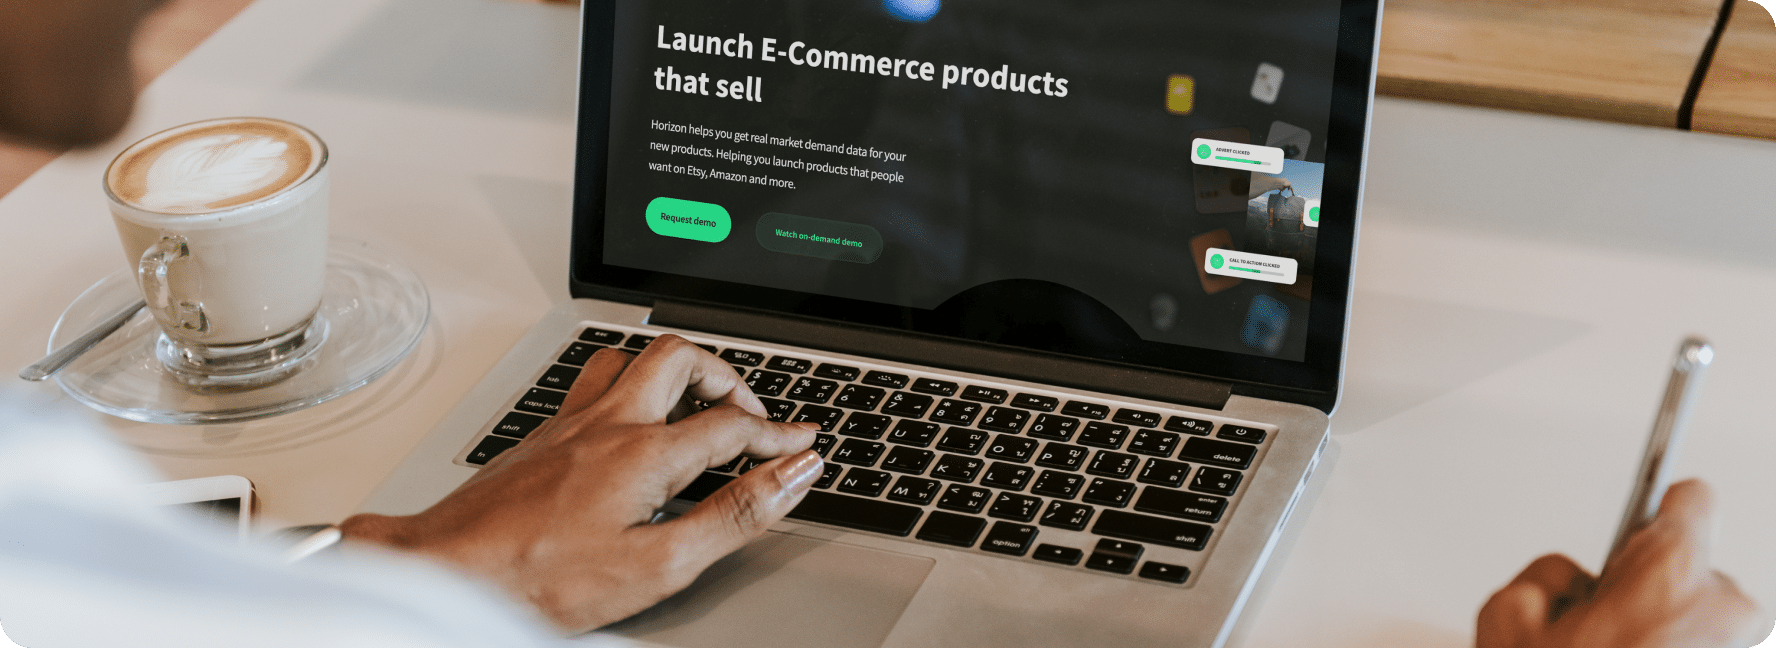 Website page for launching eCommerce products on laptop screen.